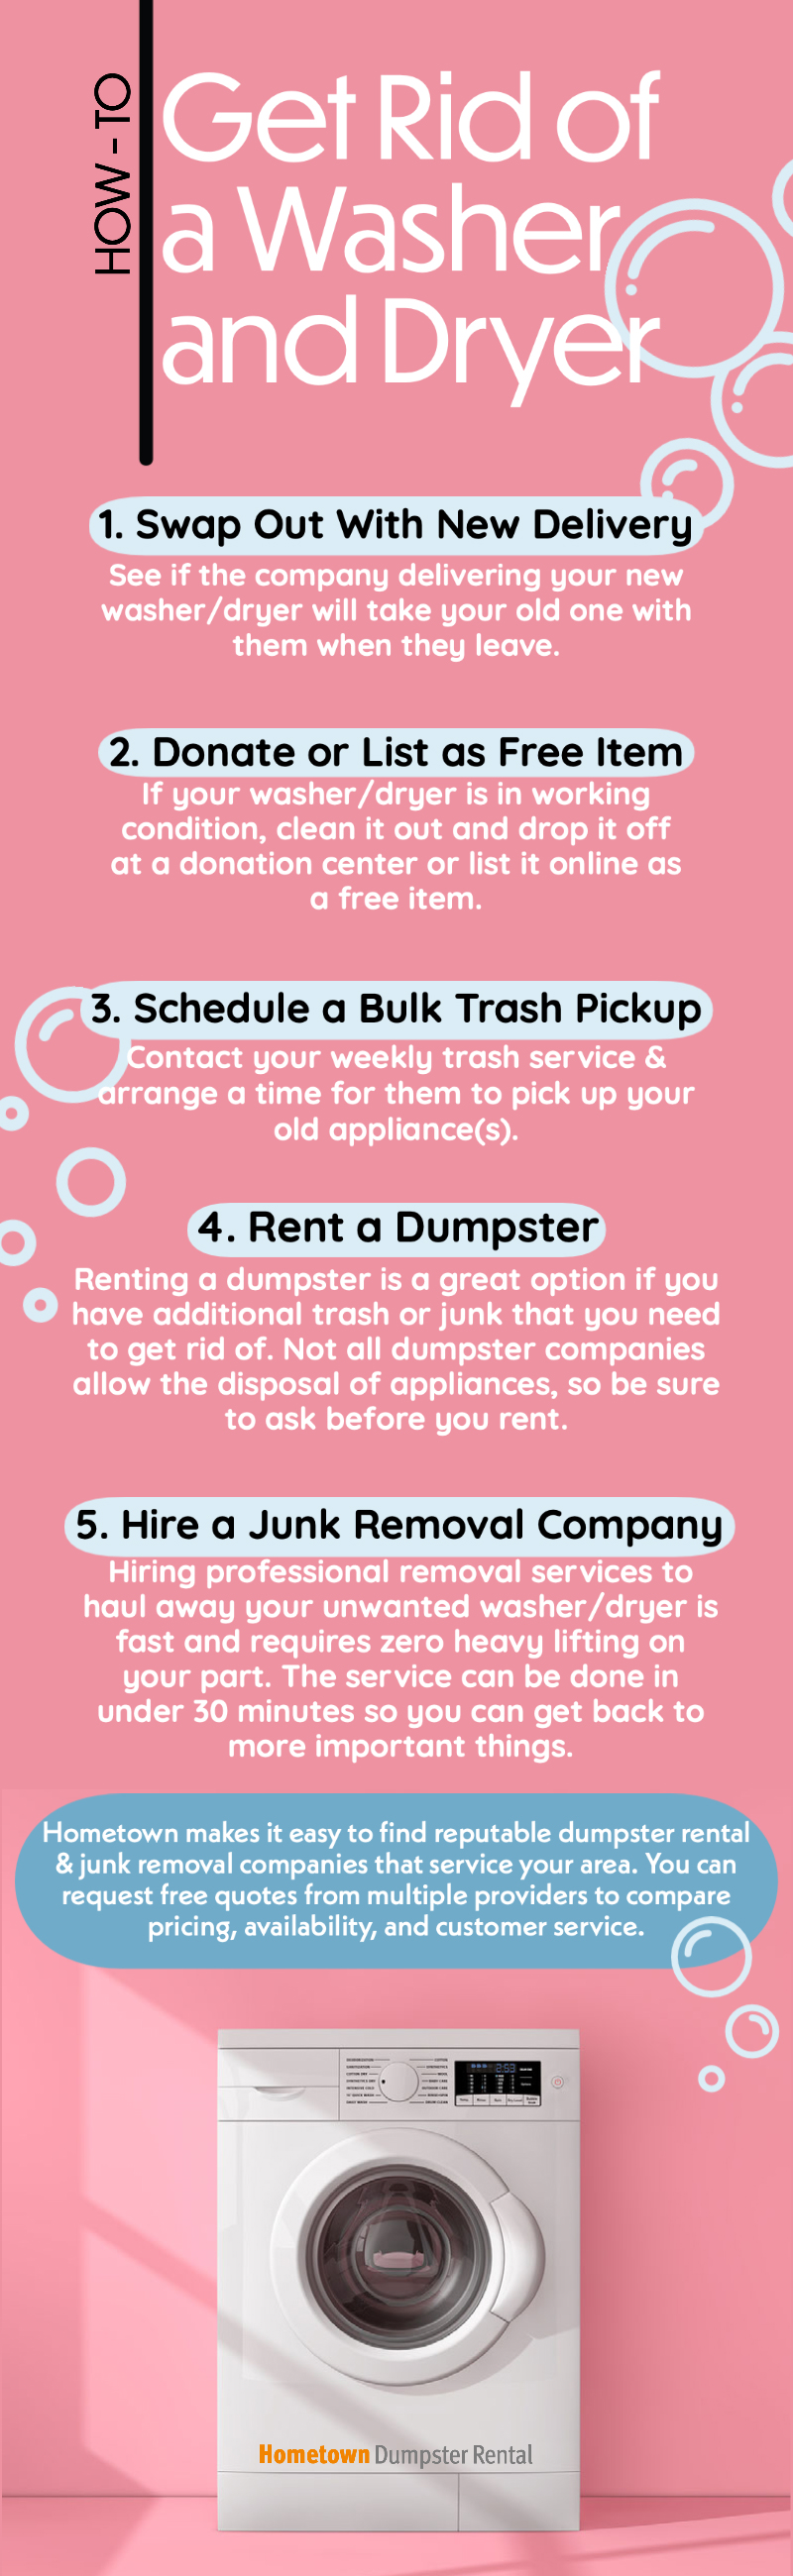 How to Get Rid of a Washer and Dryer | Hometown Dumpster Rental